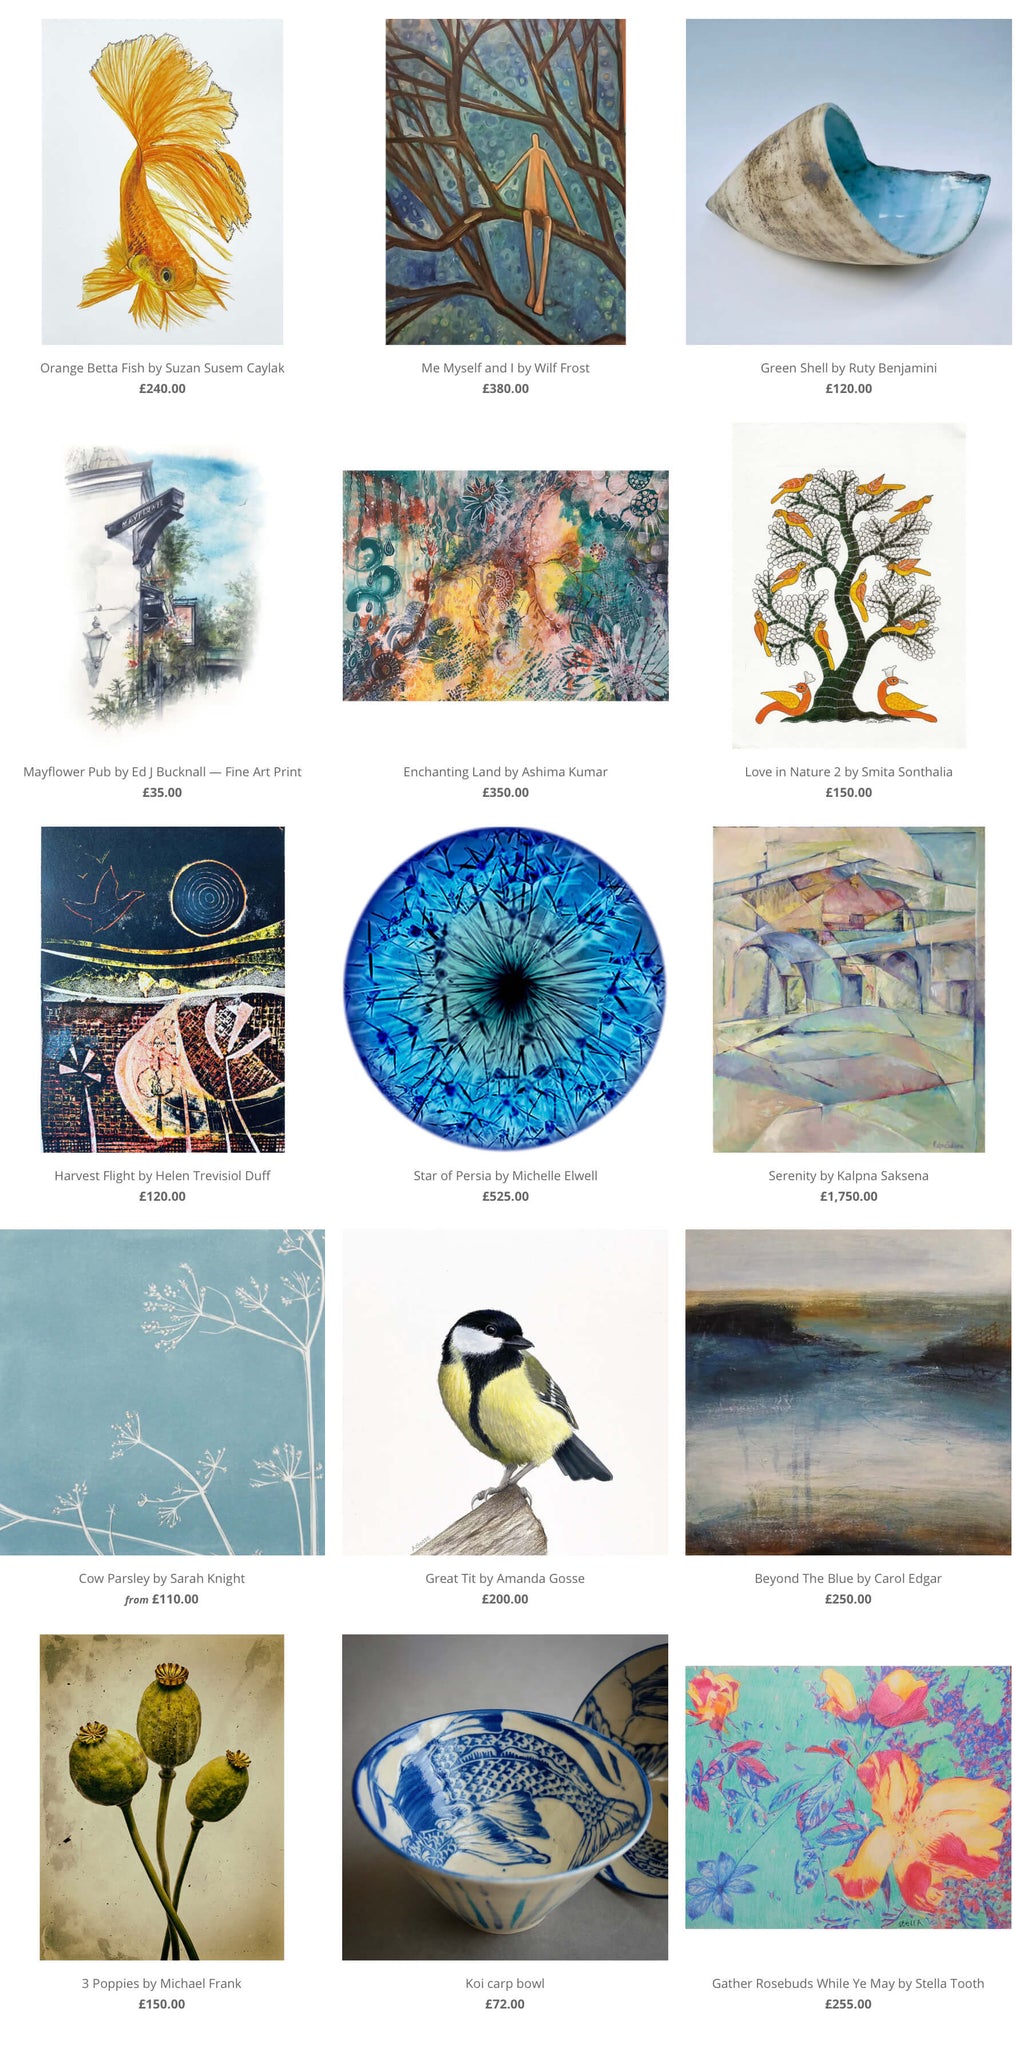 online exhibition august 2022, original contemporary artworks, for sale at affordable prices, direct from london skylark galleries artists